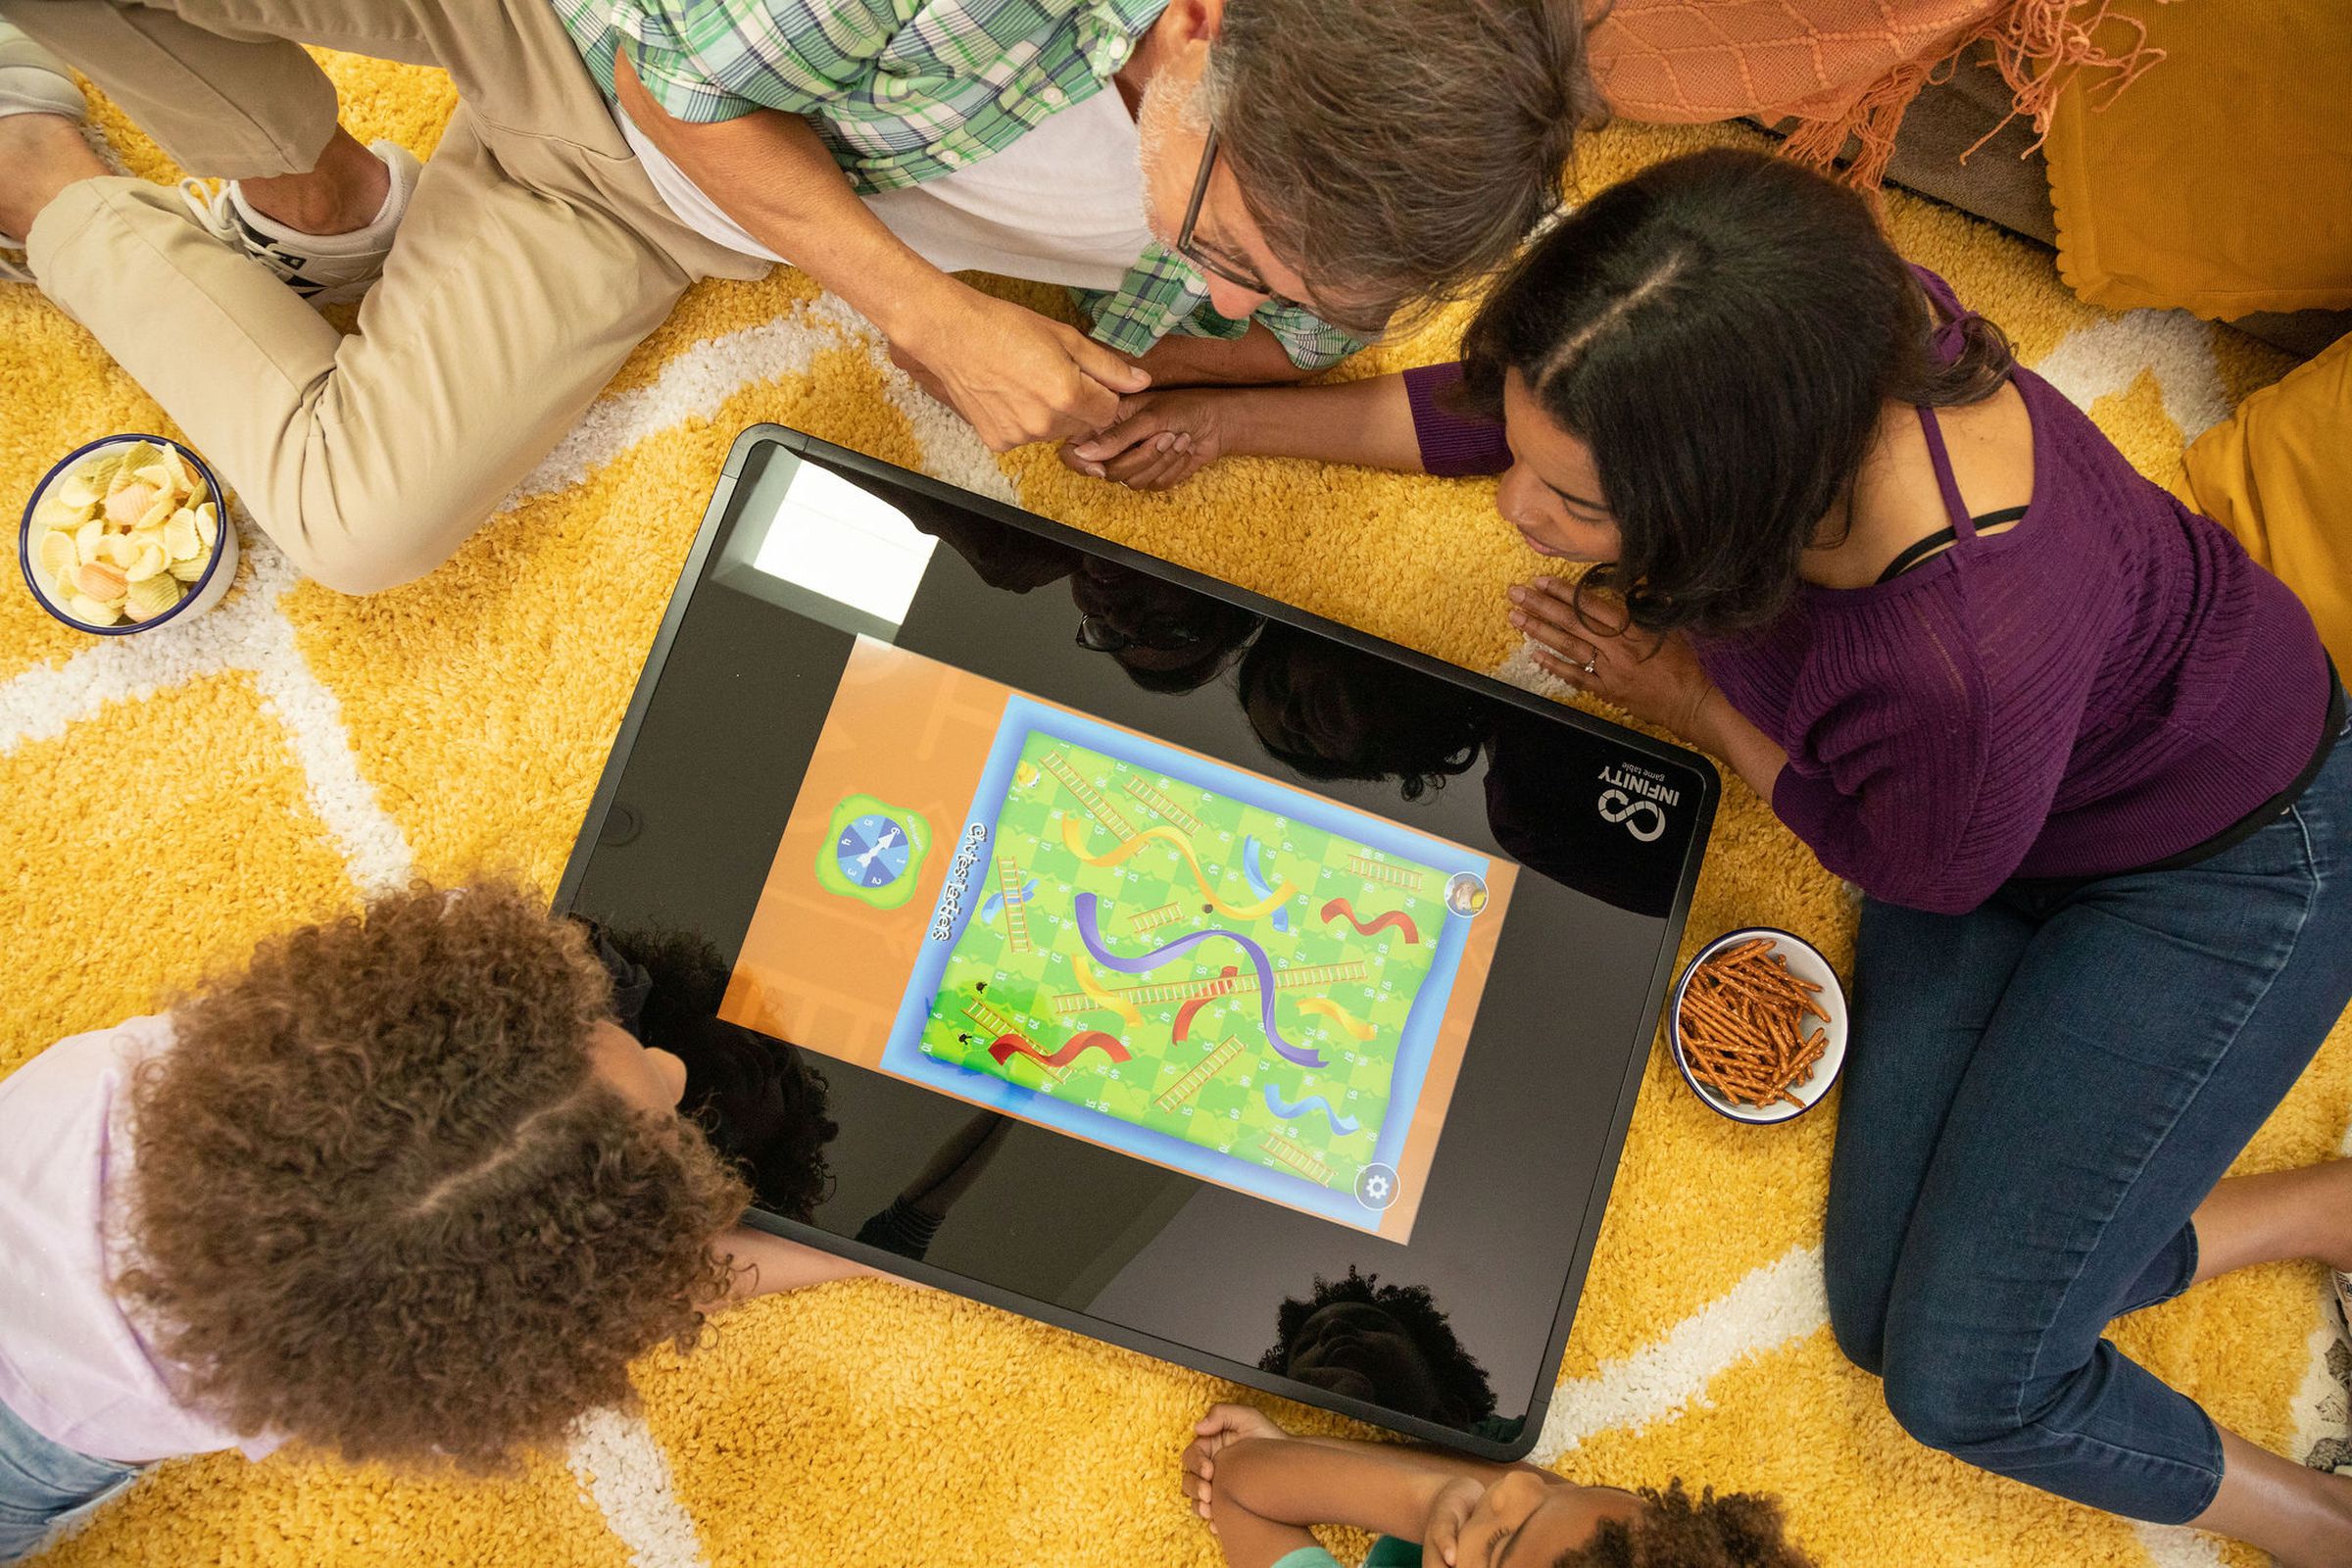 The 24-inch Infinity Game Table, which has giant bezels.